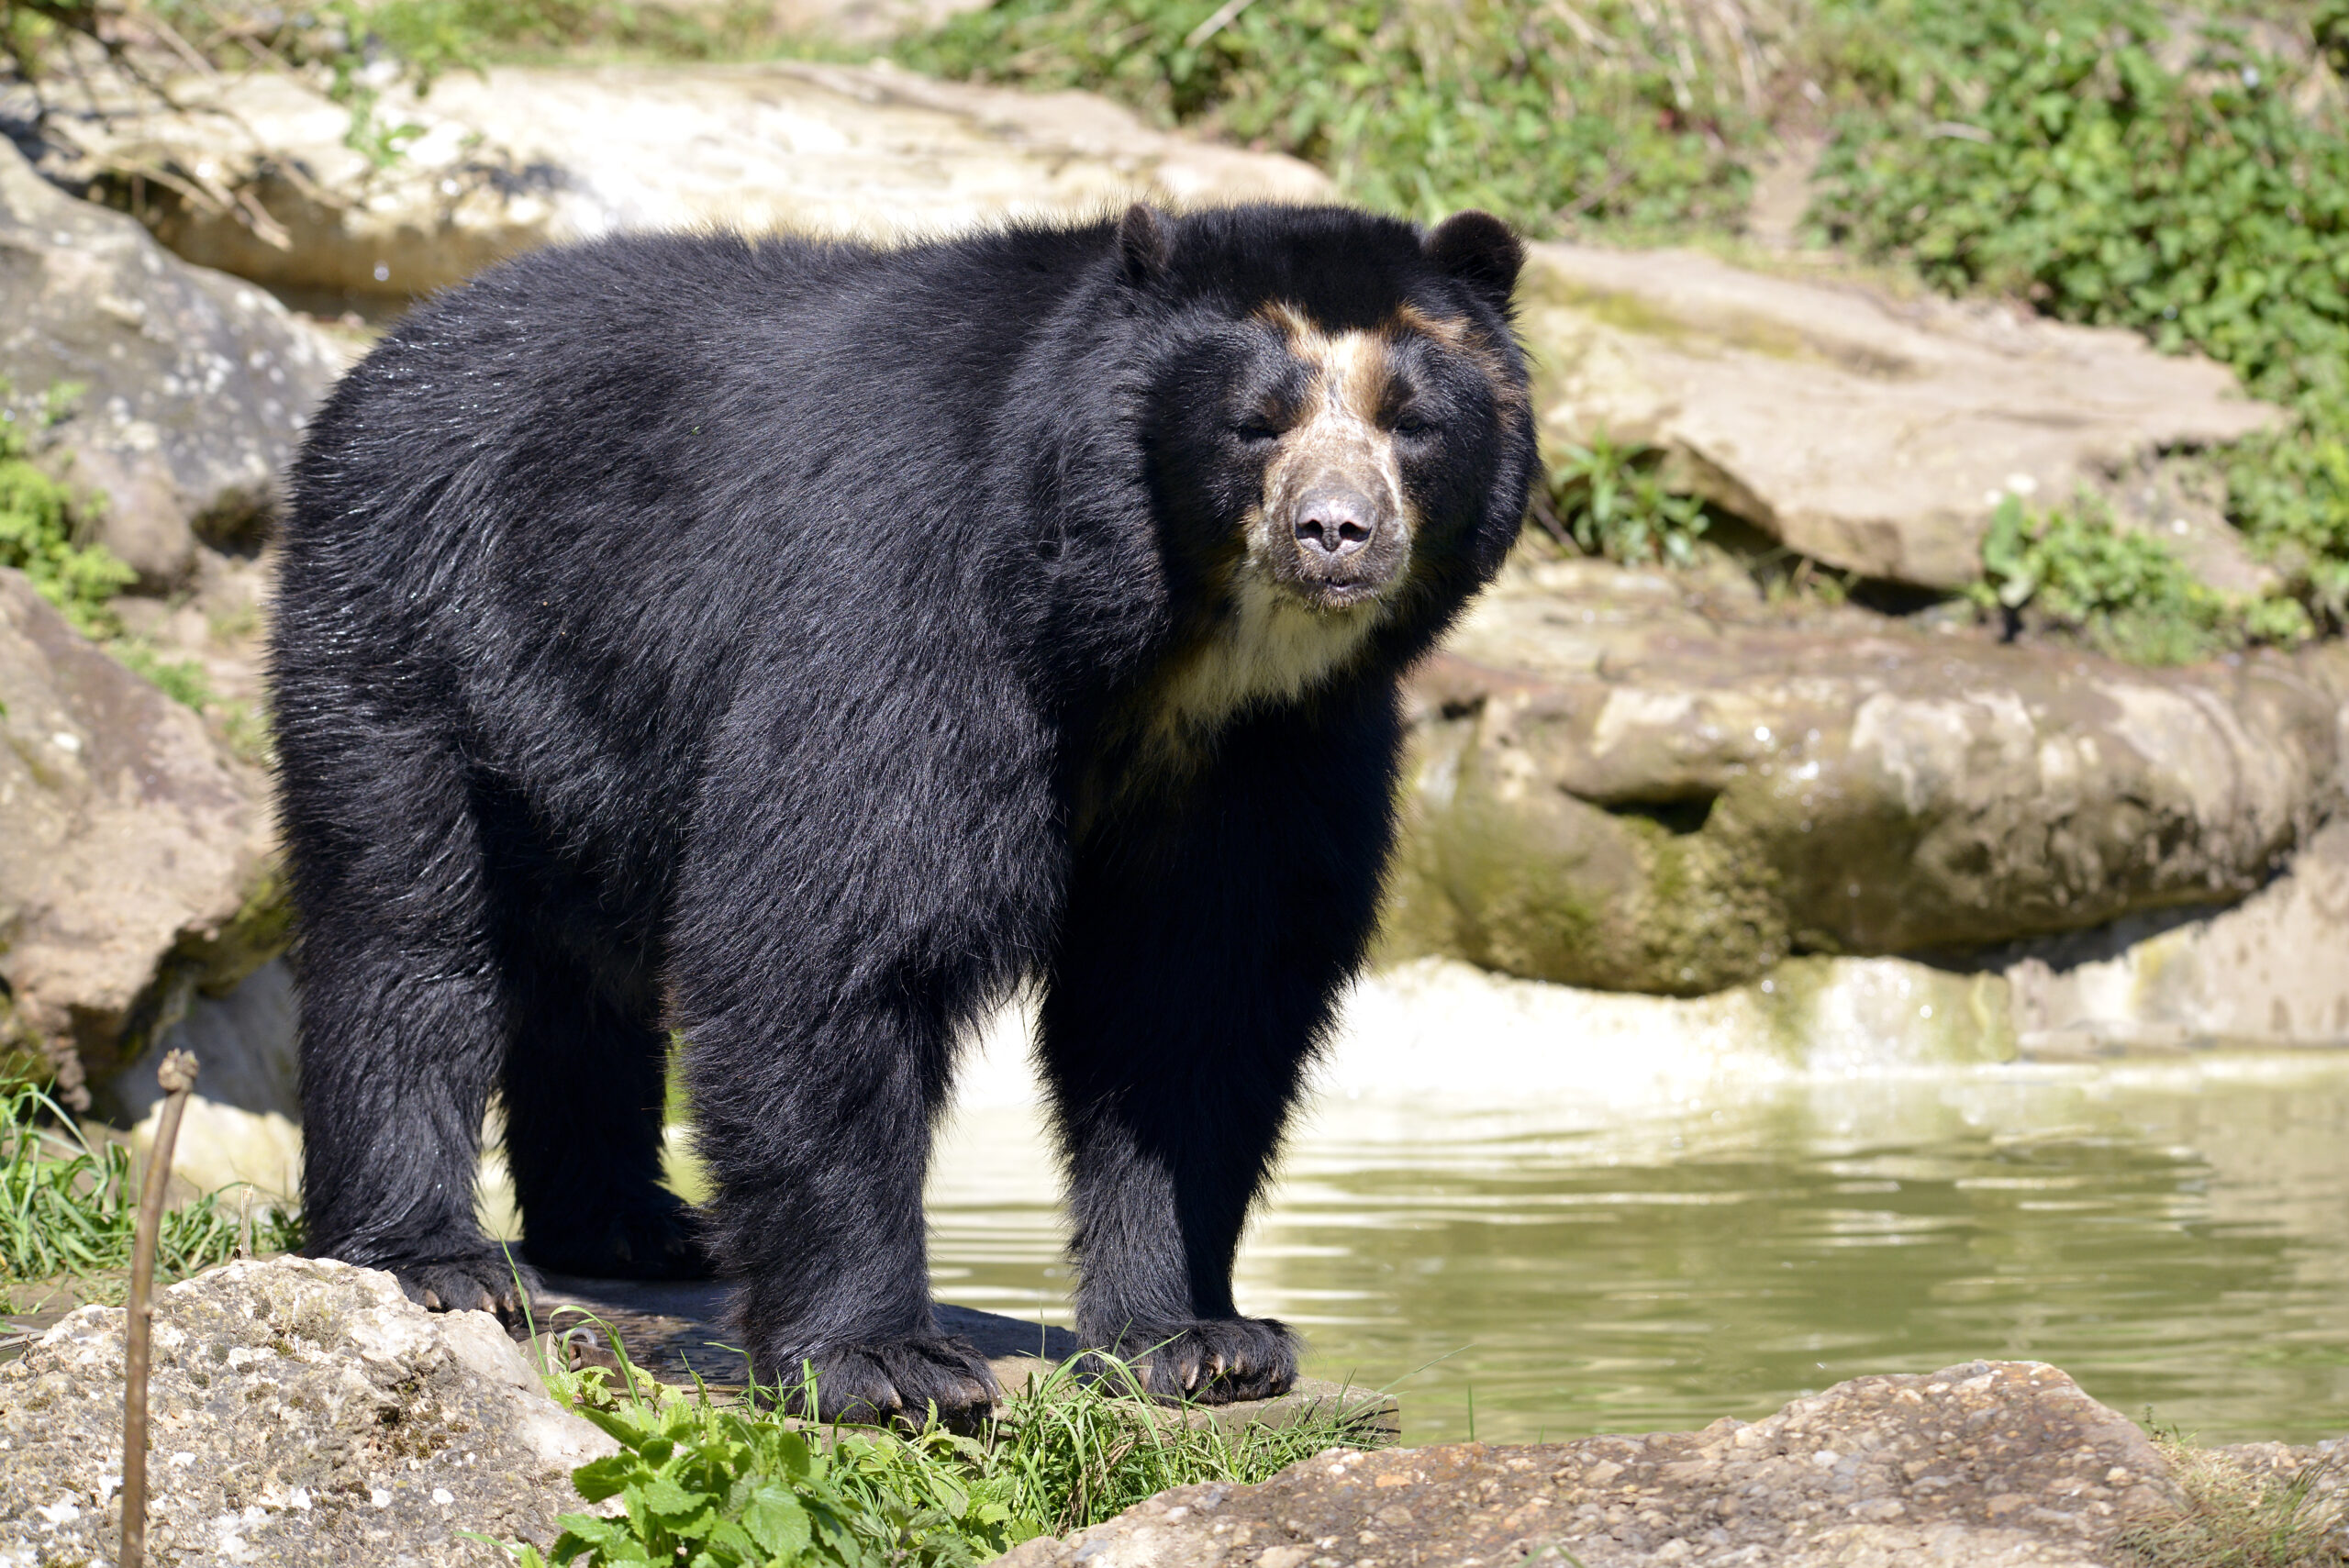 Andean bear in the Andes Mountain Range